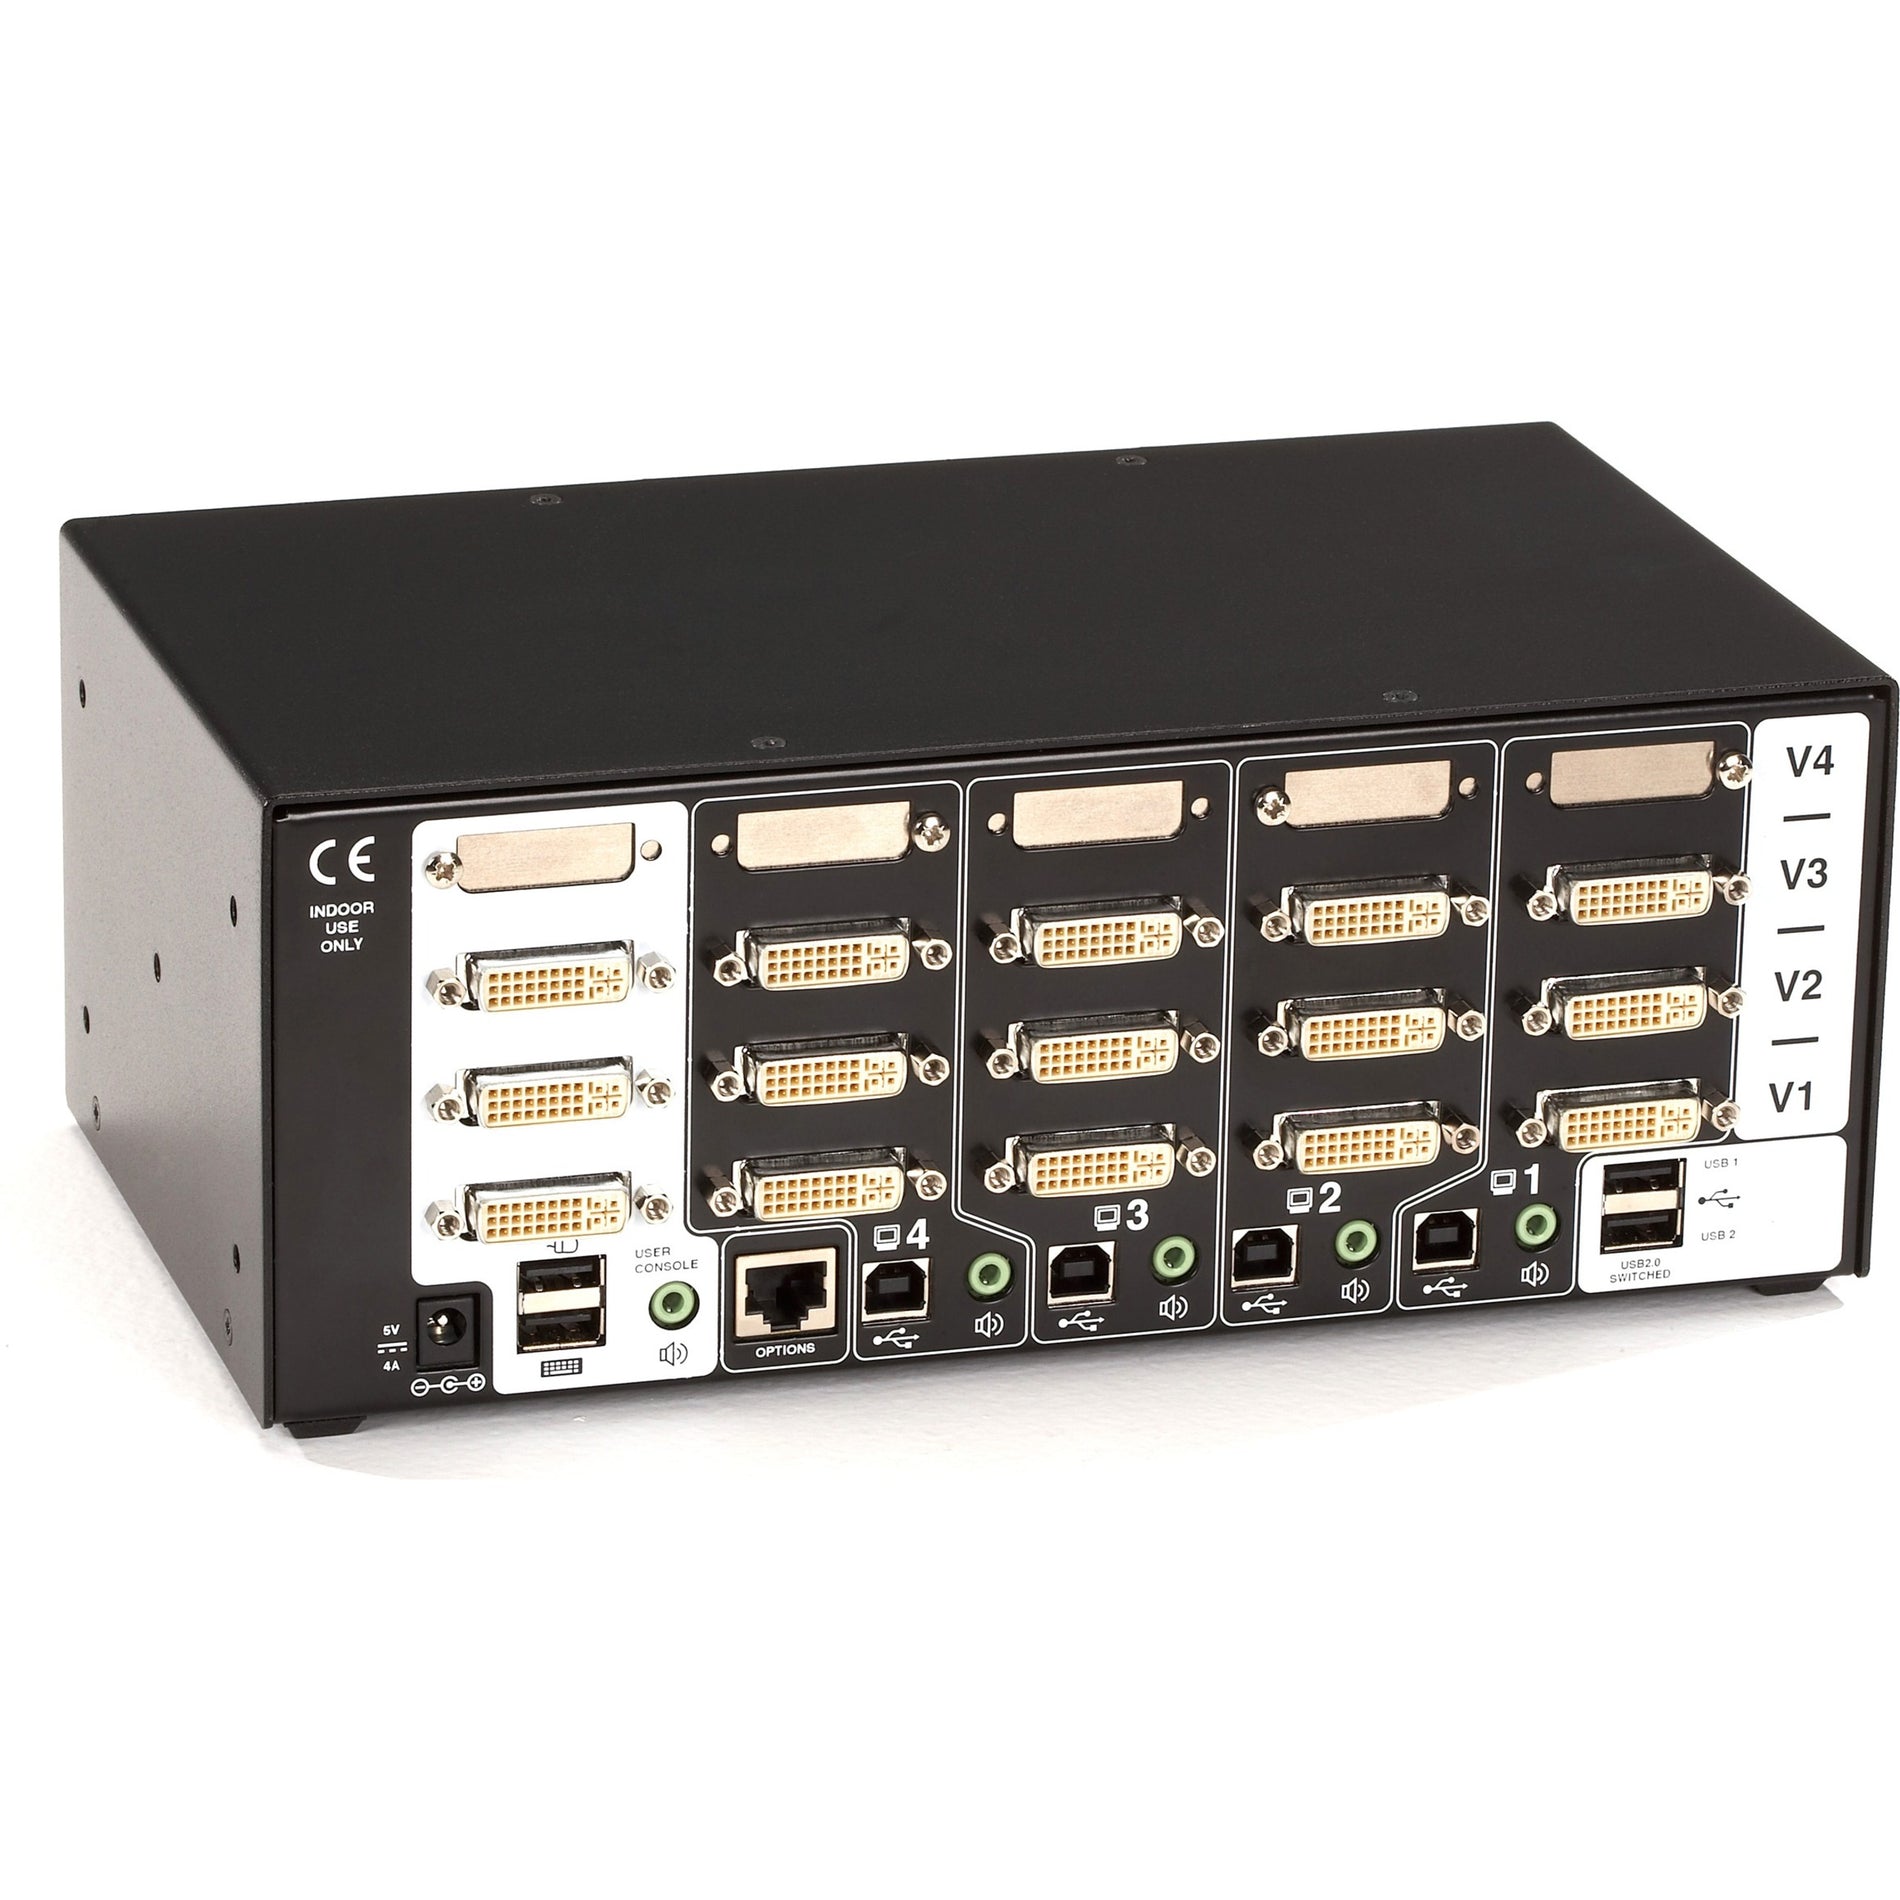 Black Box KV2304A ServSwitch Wizard Dual-Link DVI Tri-Head with USB True Emulation, 4 Computers Supported, 2 Year Warranty